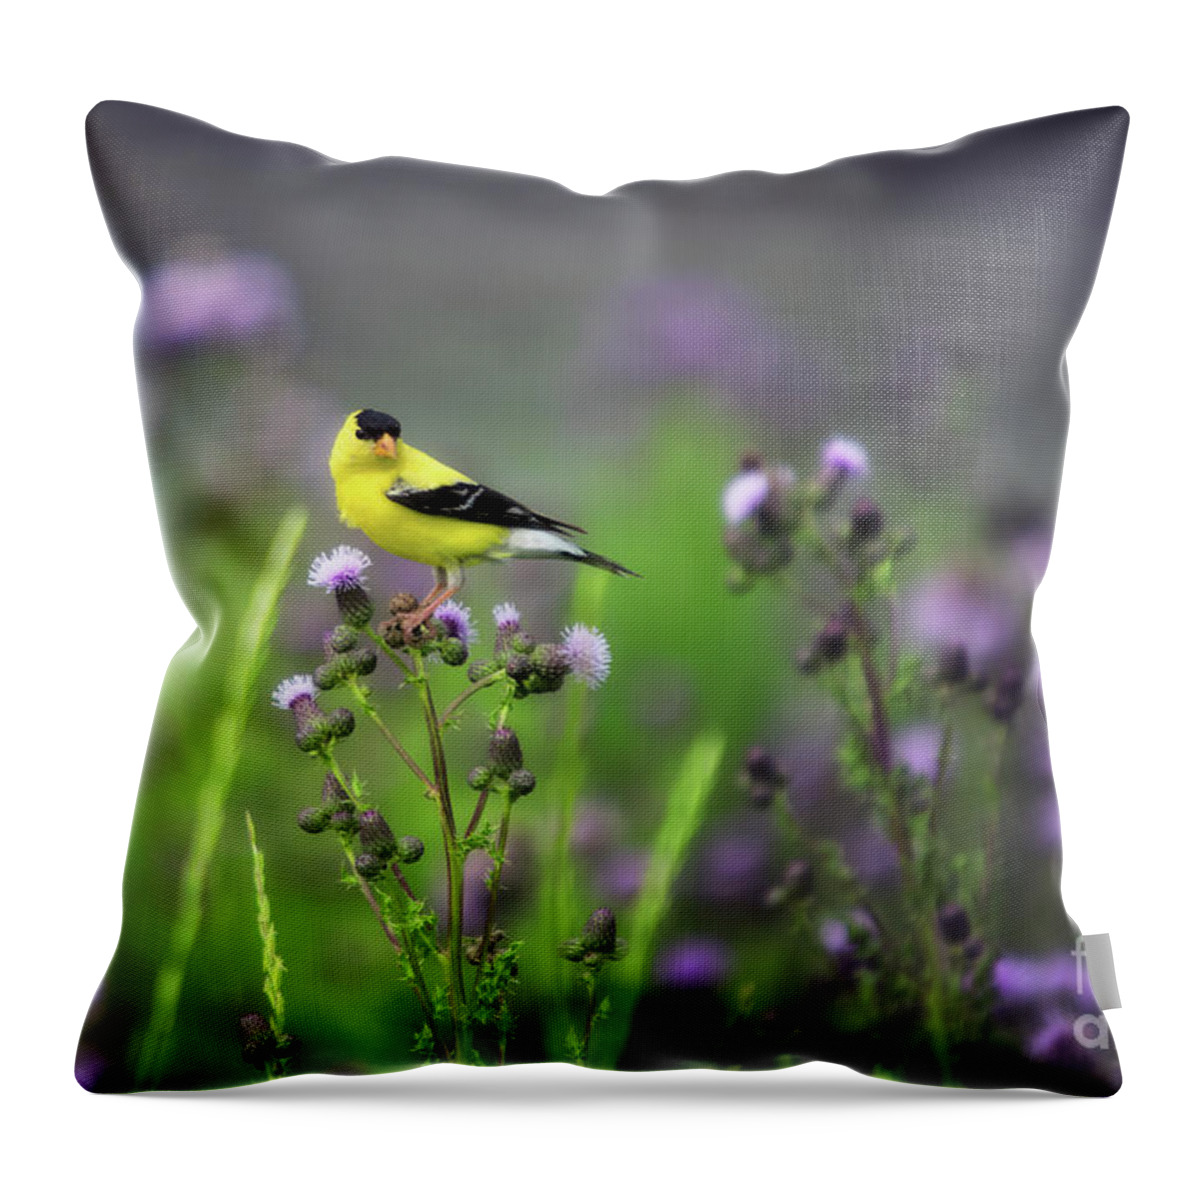 Canada Throw Pillow featuring the photograph Amercian Goldfinch by Ian McGregor